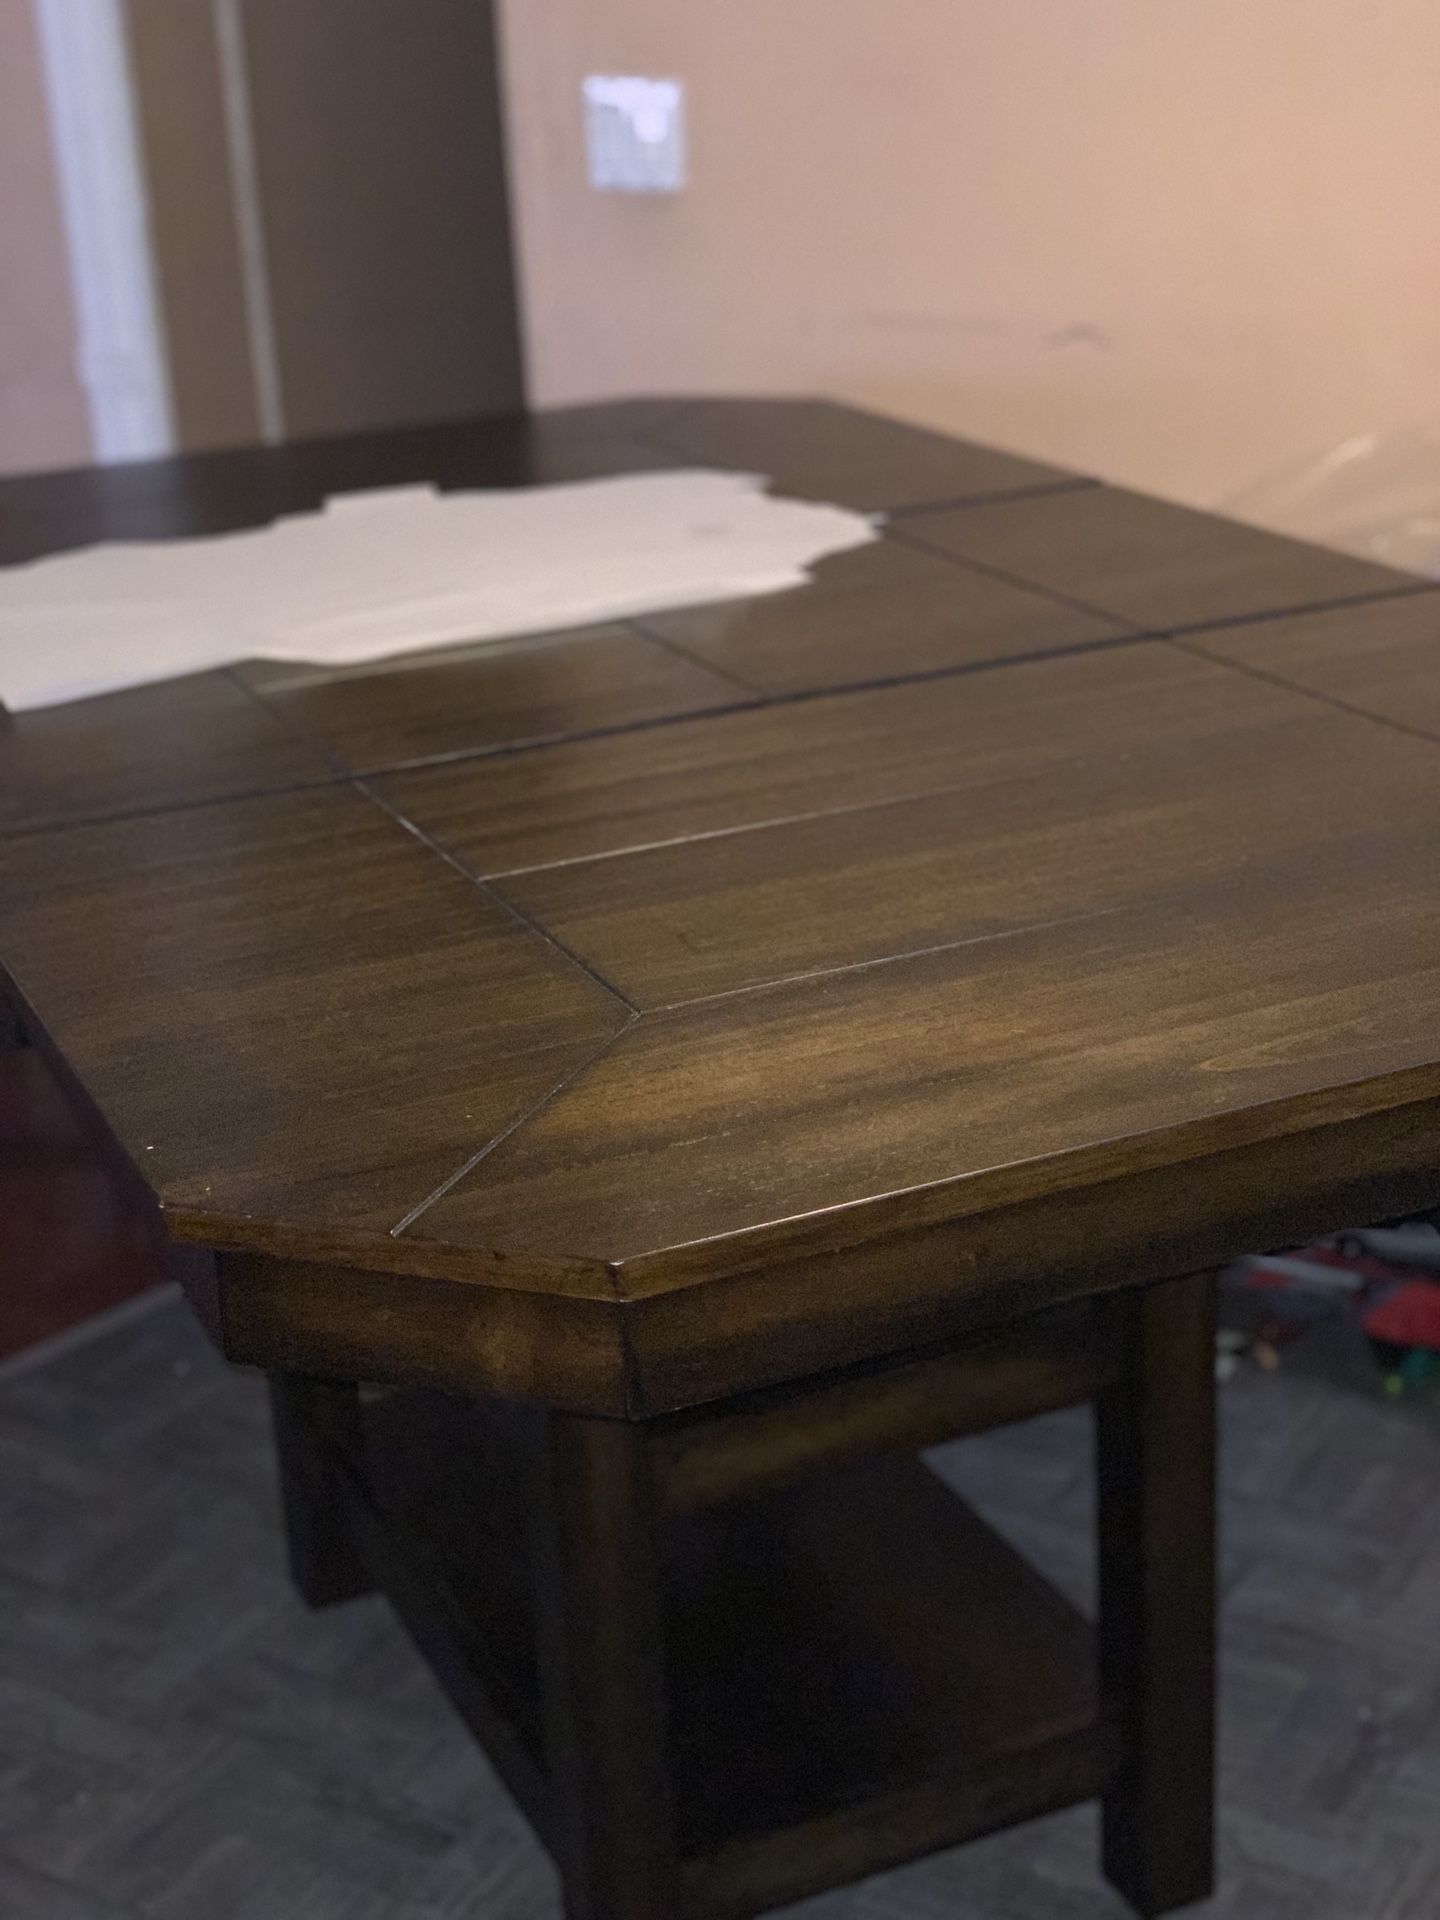 NOT free! Dining table set, included chairs! Built in extension. Real wood